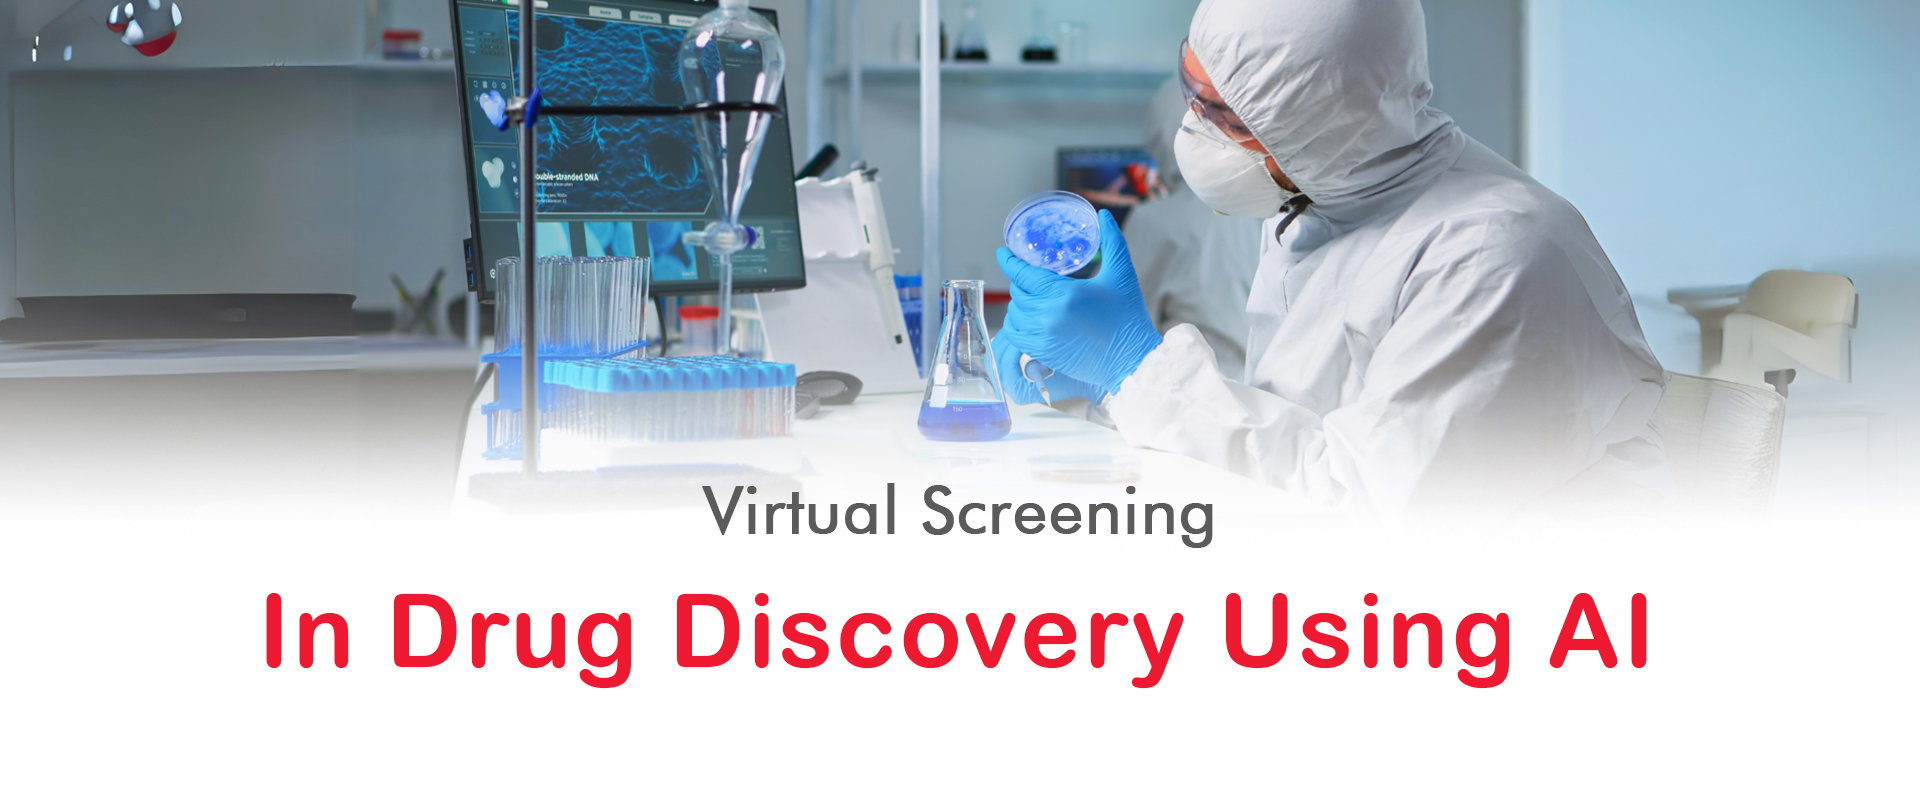 Virtual Screening in Drug Discovery Using AI